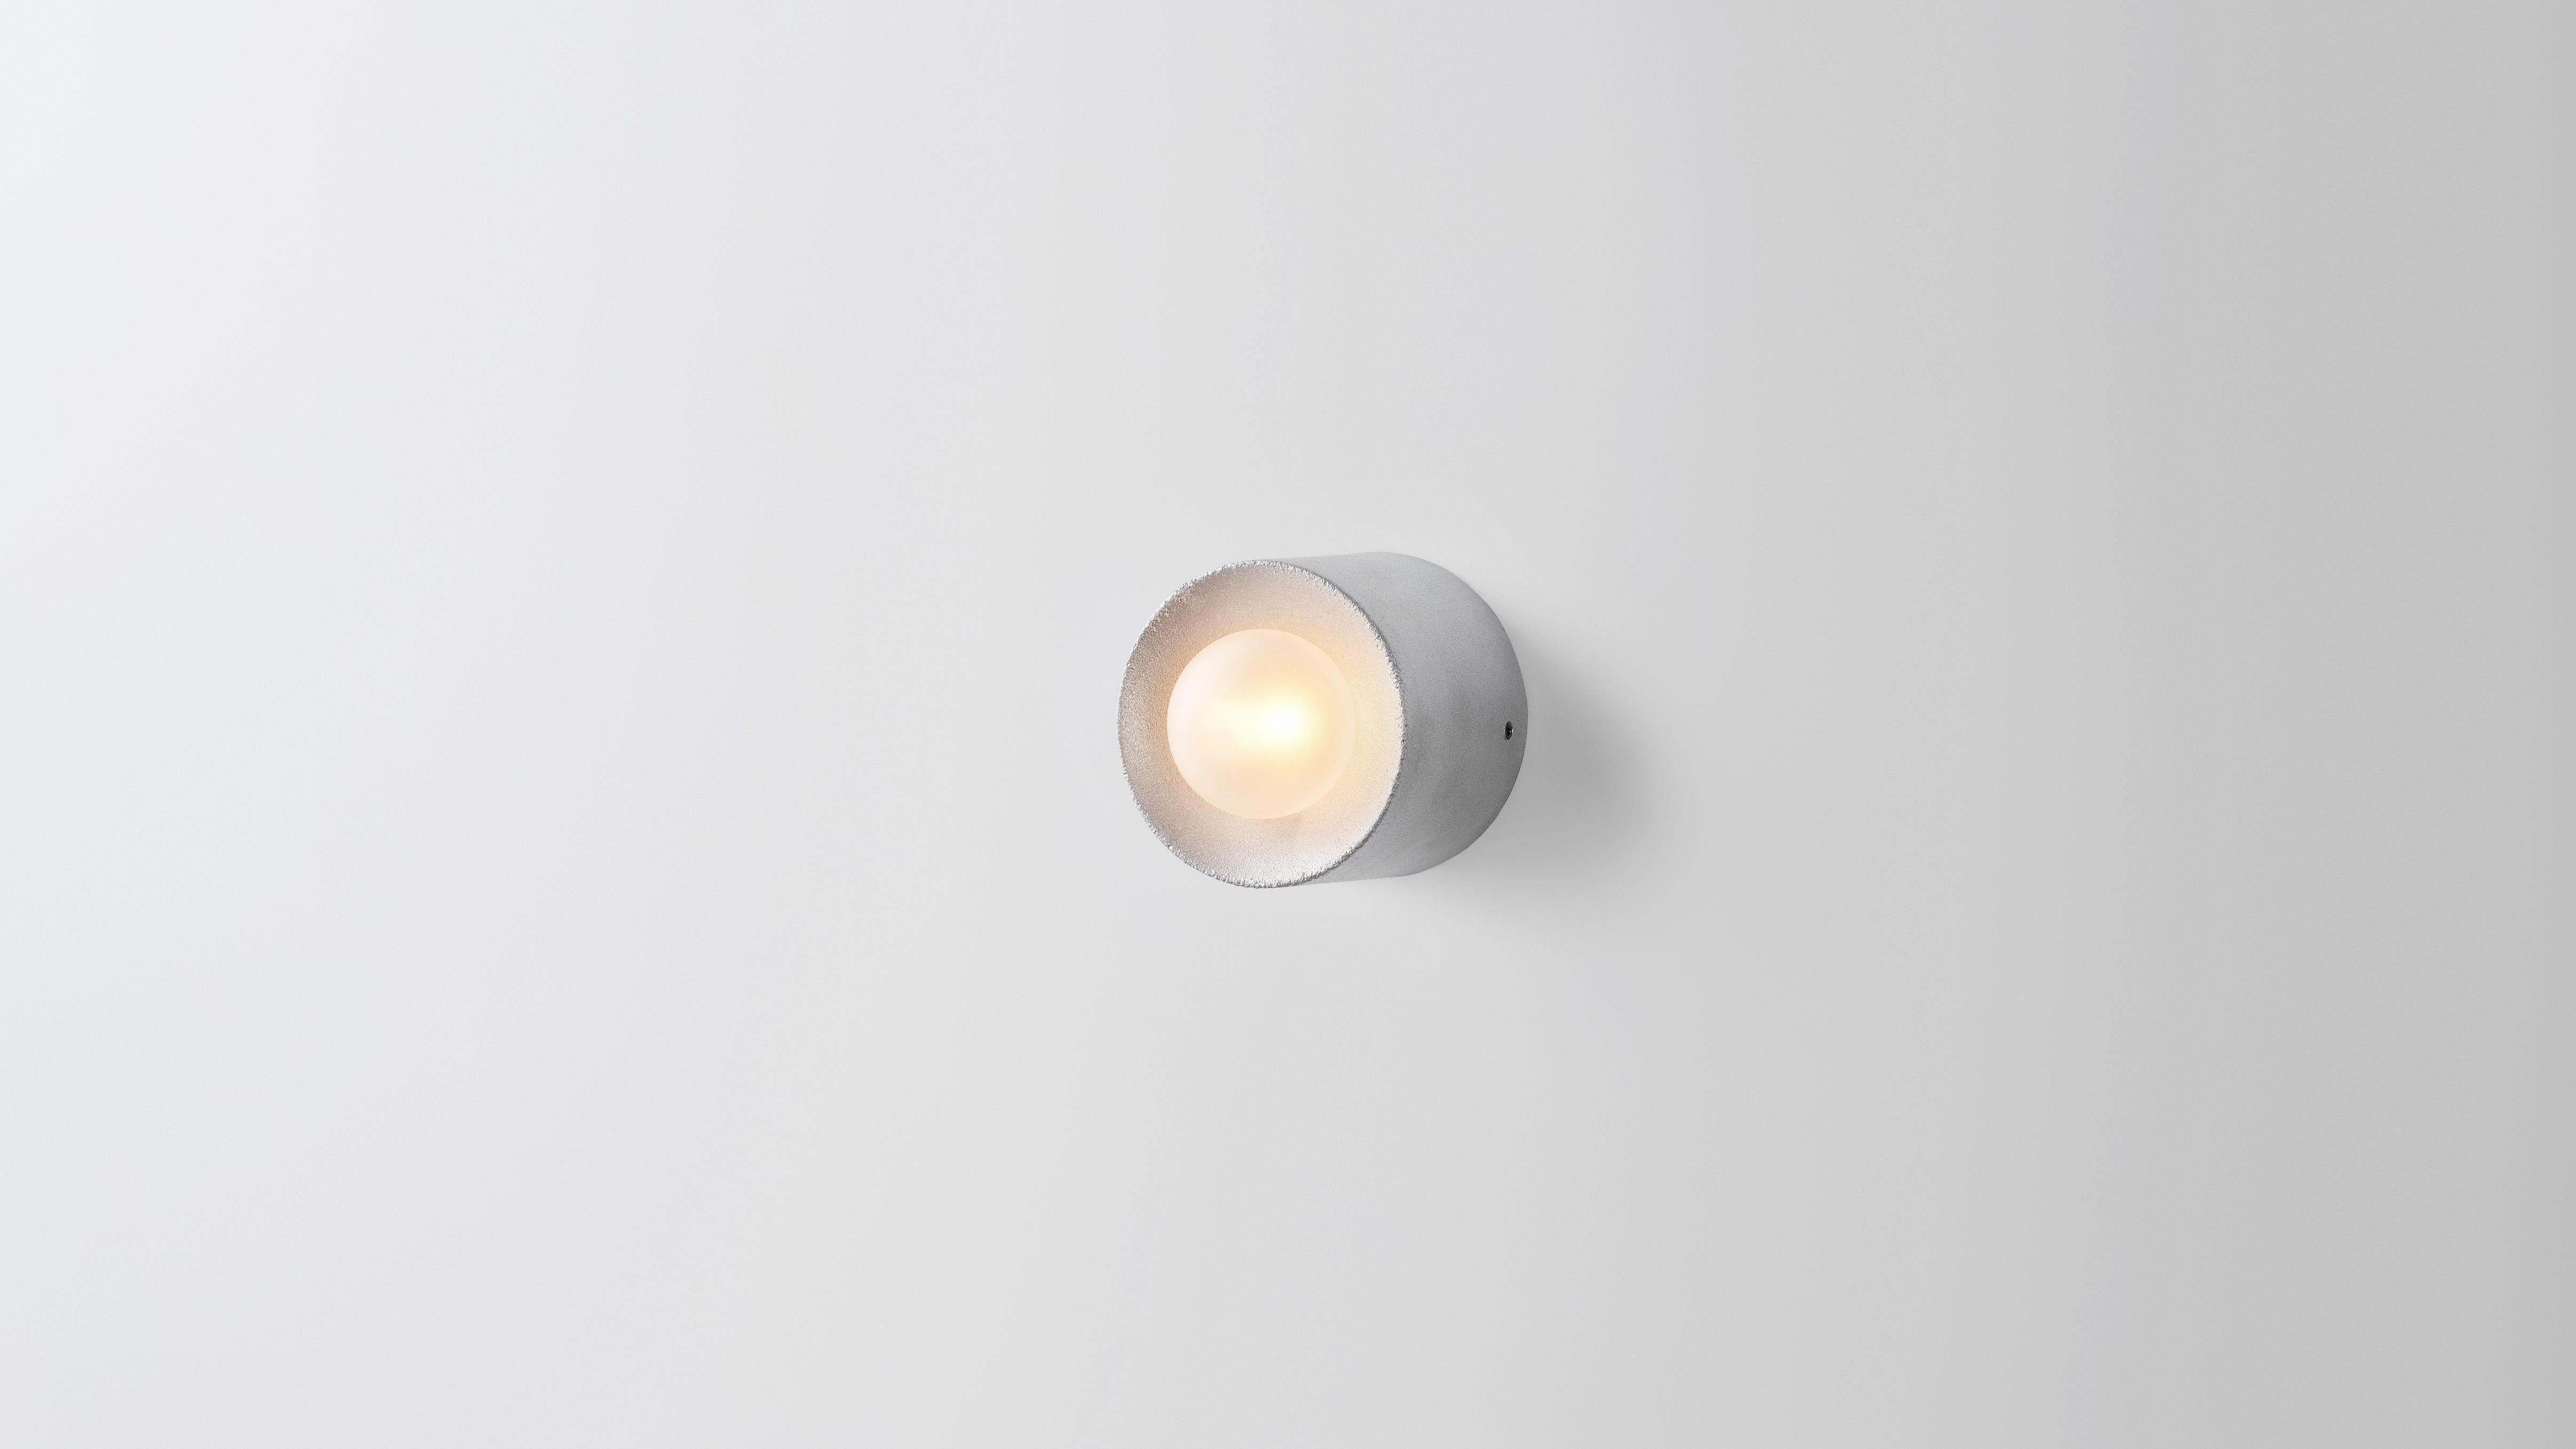 Anton micro in aluminium by Volker Haug 
Anton series
Dimensions: Ø 8 x D 6.5 cm.
Materials: Cast aluminium
Finish: Raw
Lamp: G9 LED (240V / 120V US). 12V option available.
Glass bulb: 4.5 cm ø, Frosted
Weight: 1kg

Anton Micro is the smallest in